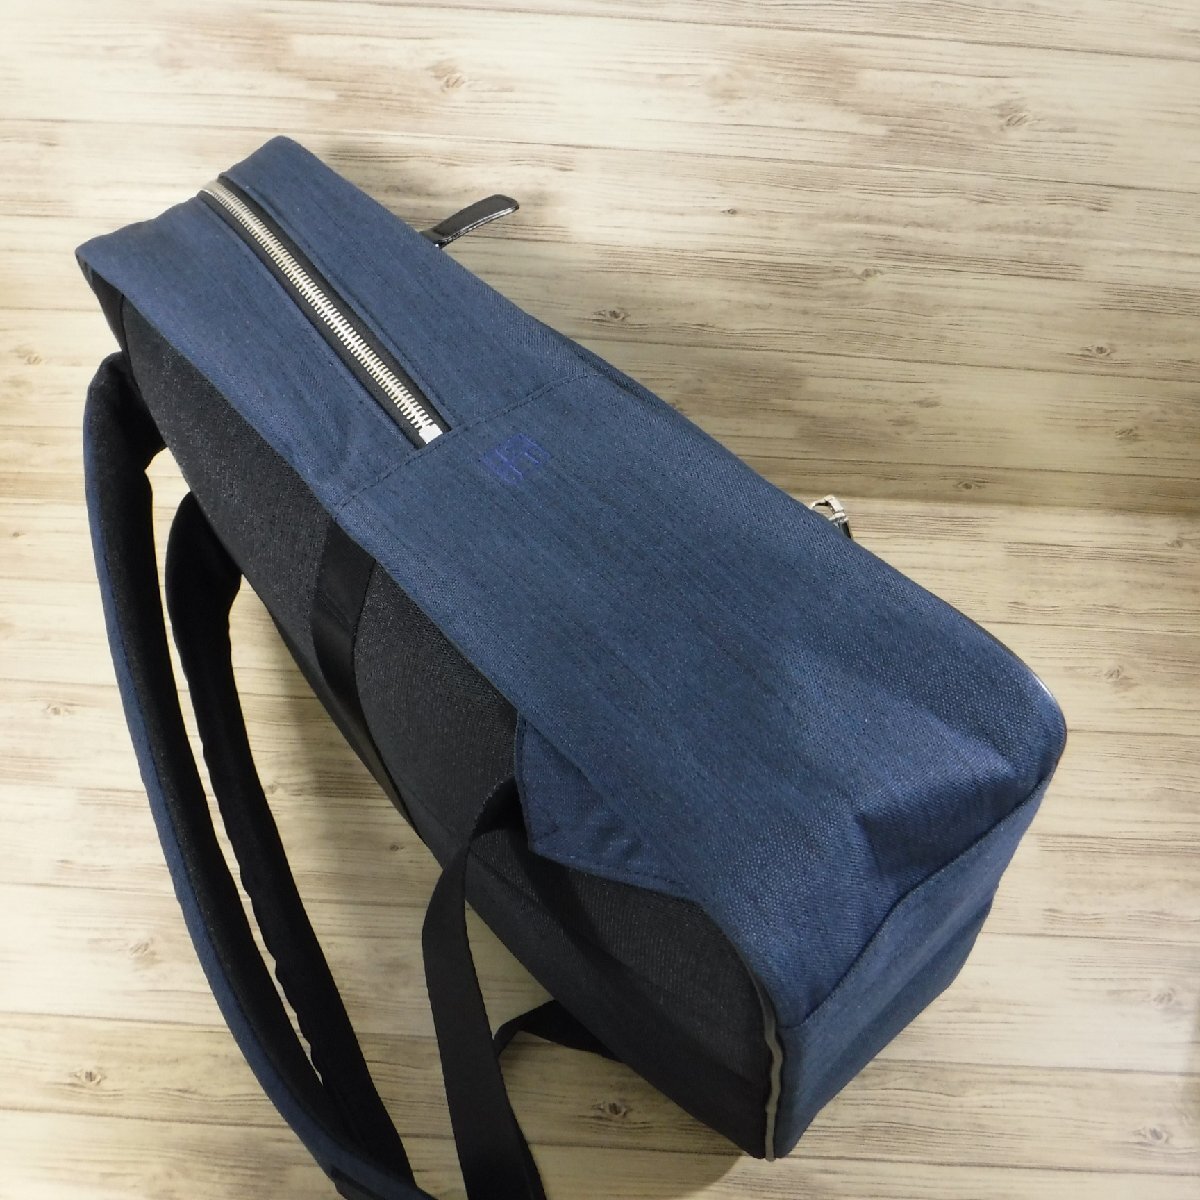 BB56izito regular price 26400 jpy new goods business rucksack B4 size light weight water-repellent material IS/IT navy blue 962701 backpack A4